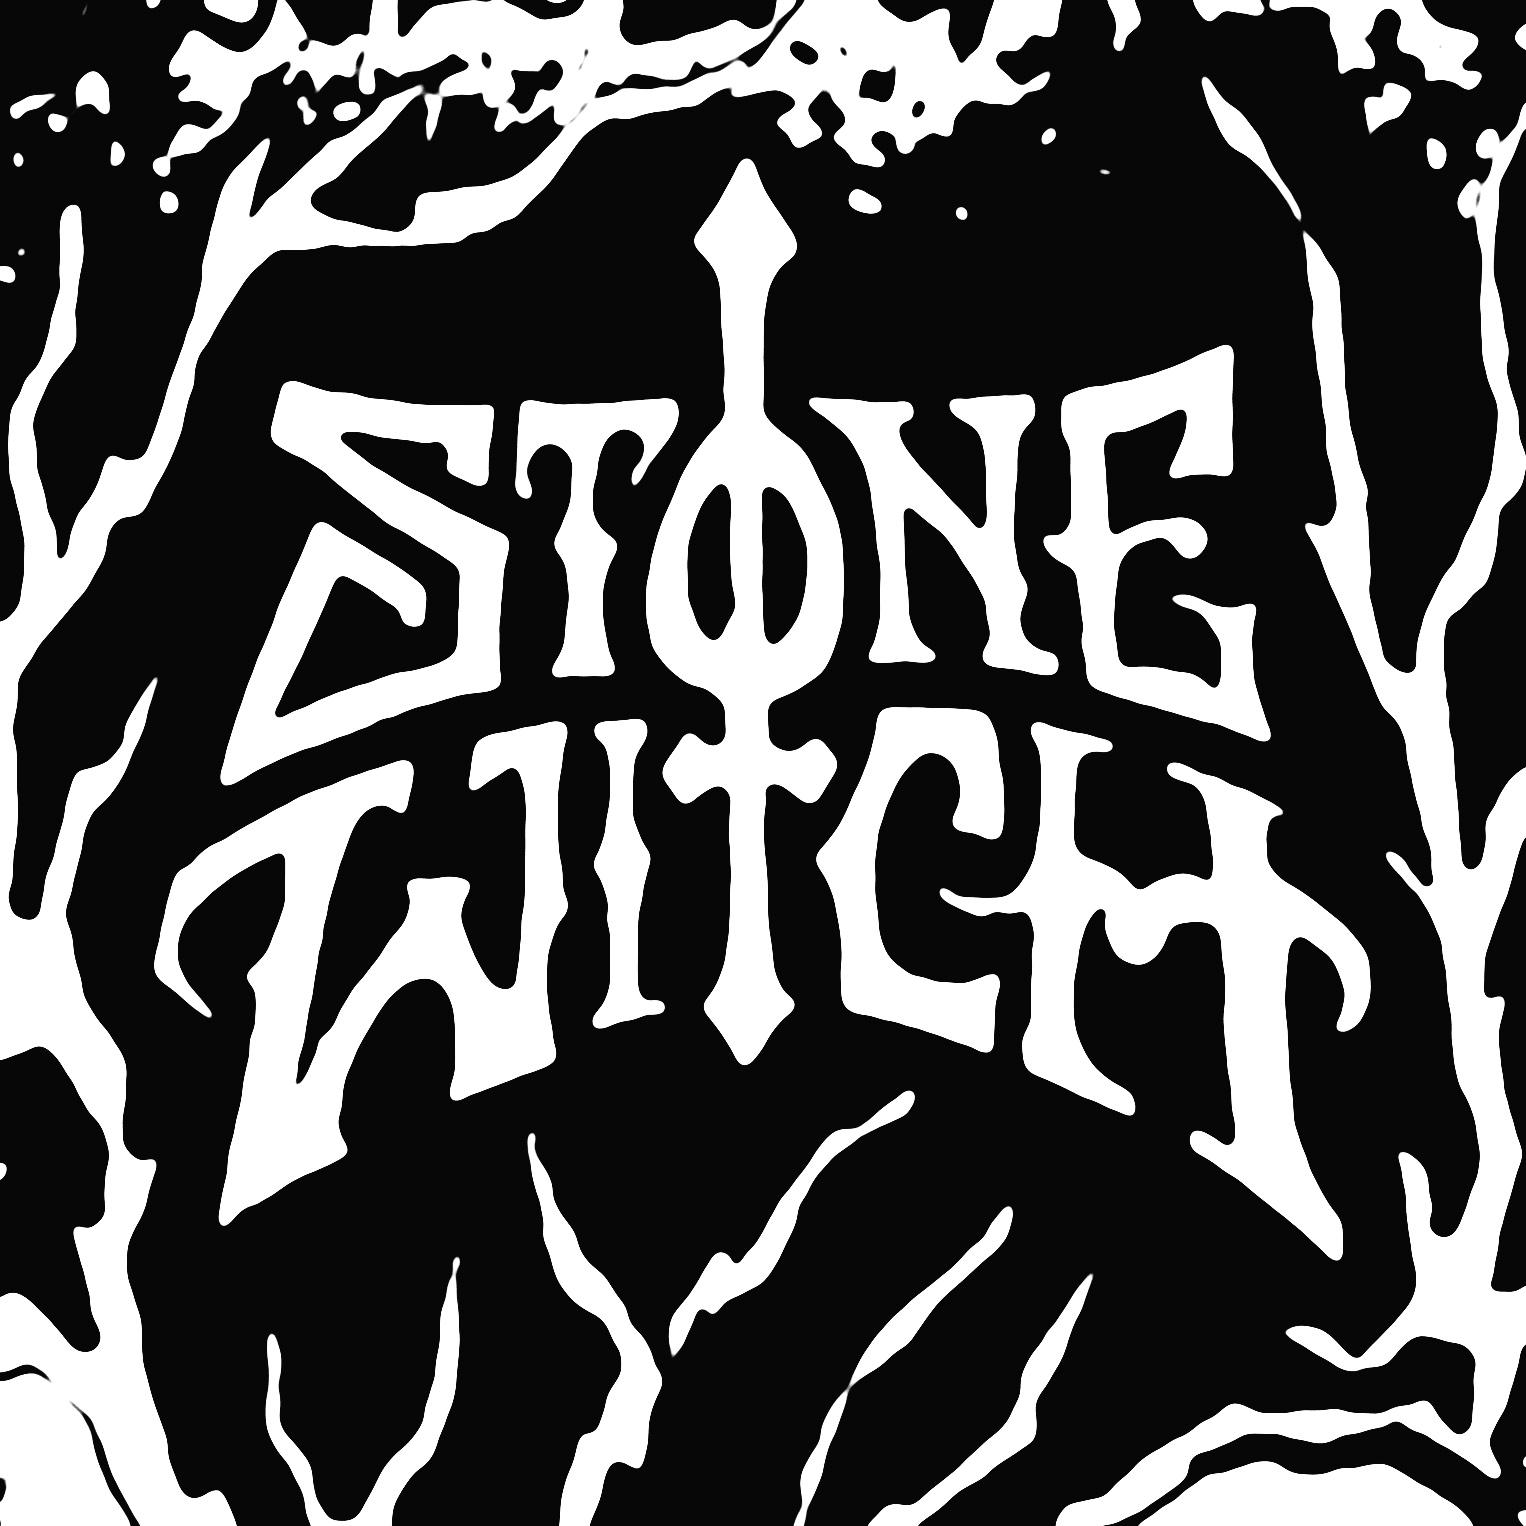 Witch stones. Stone Gods Burn the Witch. Wind Walkers Band. Stone Walker. Stoner Black Metal.